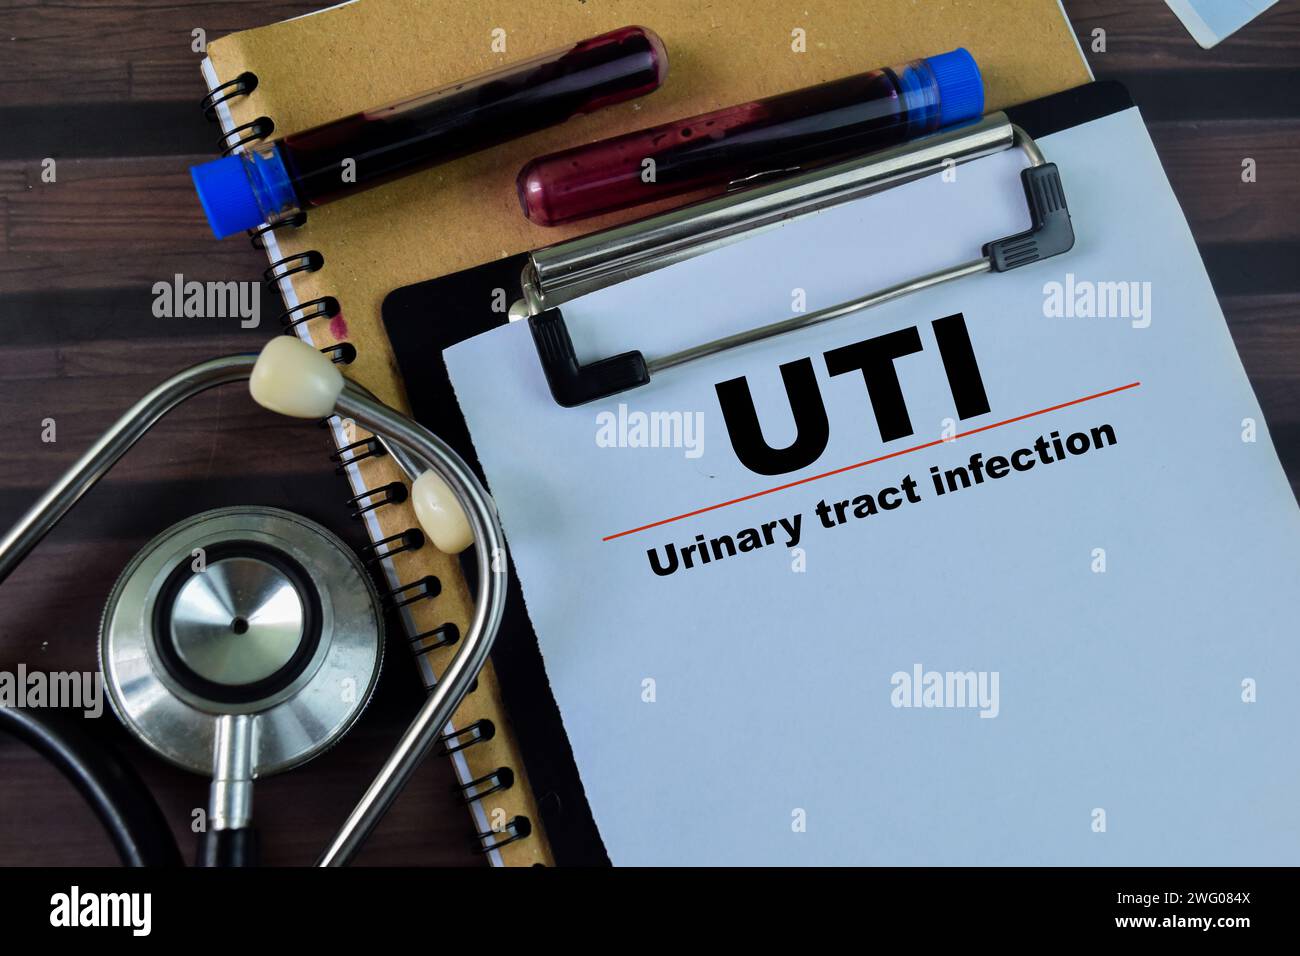 Concept of UTI - Urinary Tract Infection write on paperwork with stethoscope isolated on wooden background. Stock Photo